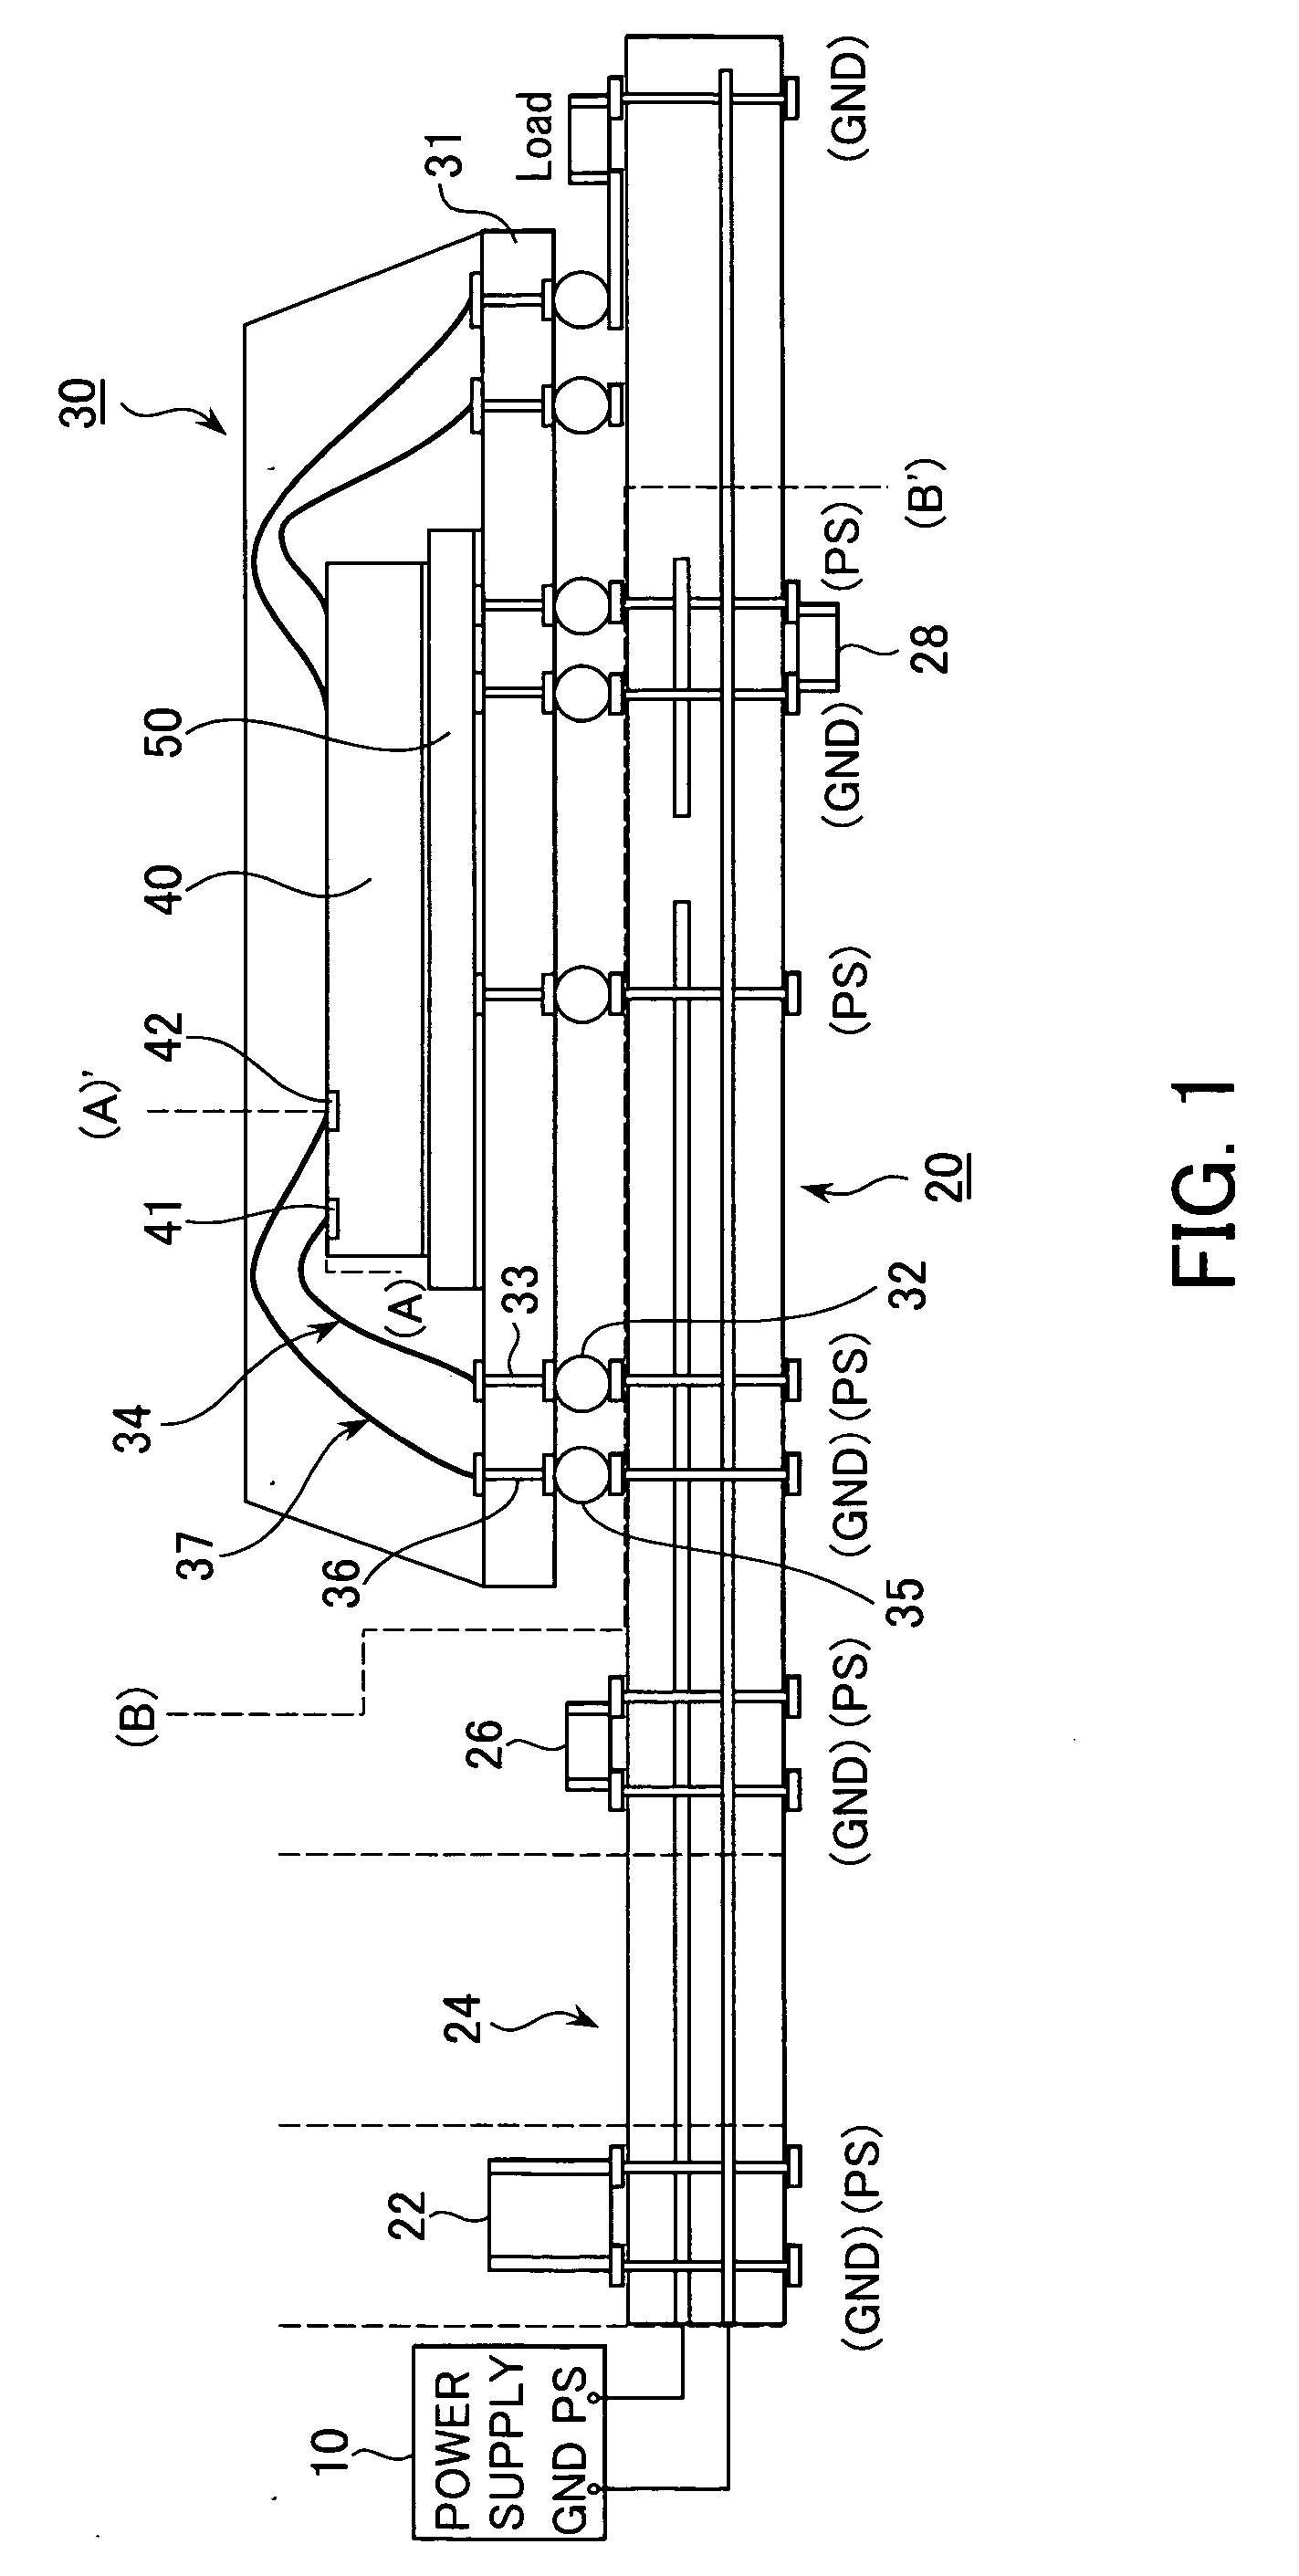 Method for designing semiconductor apparatus, system for aiding to design semiconductor apparatus, computer program product therefor and semiconductor package